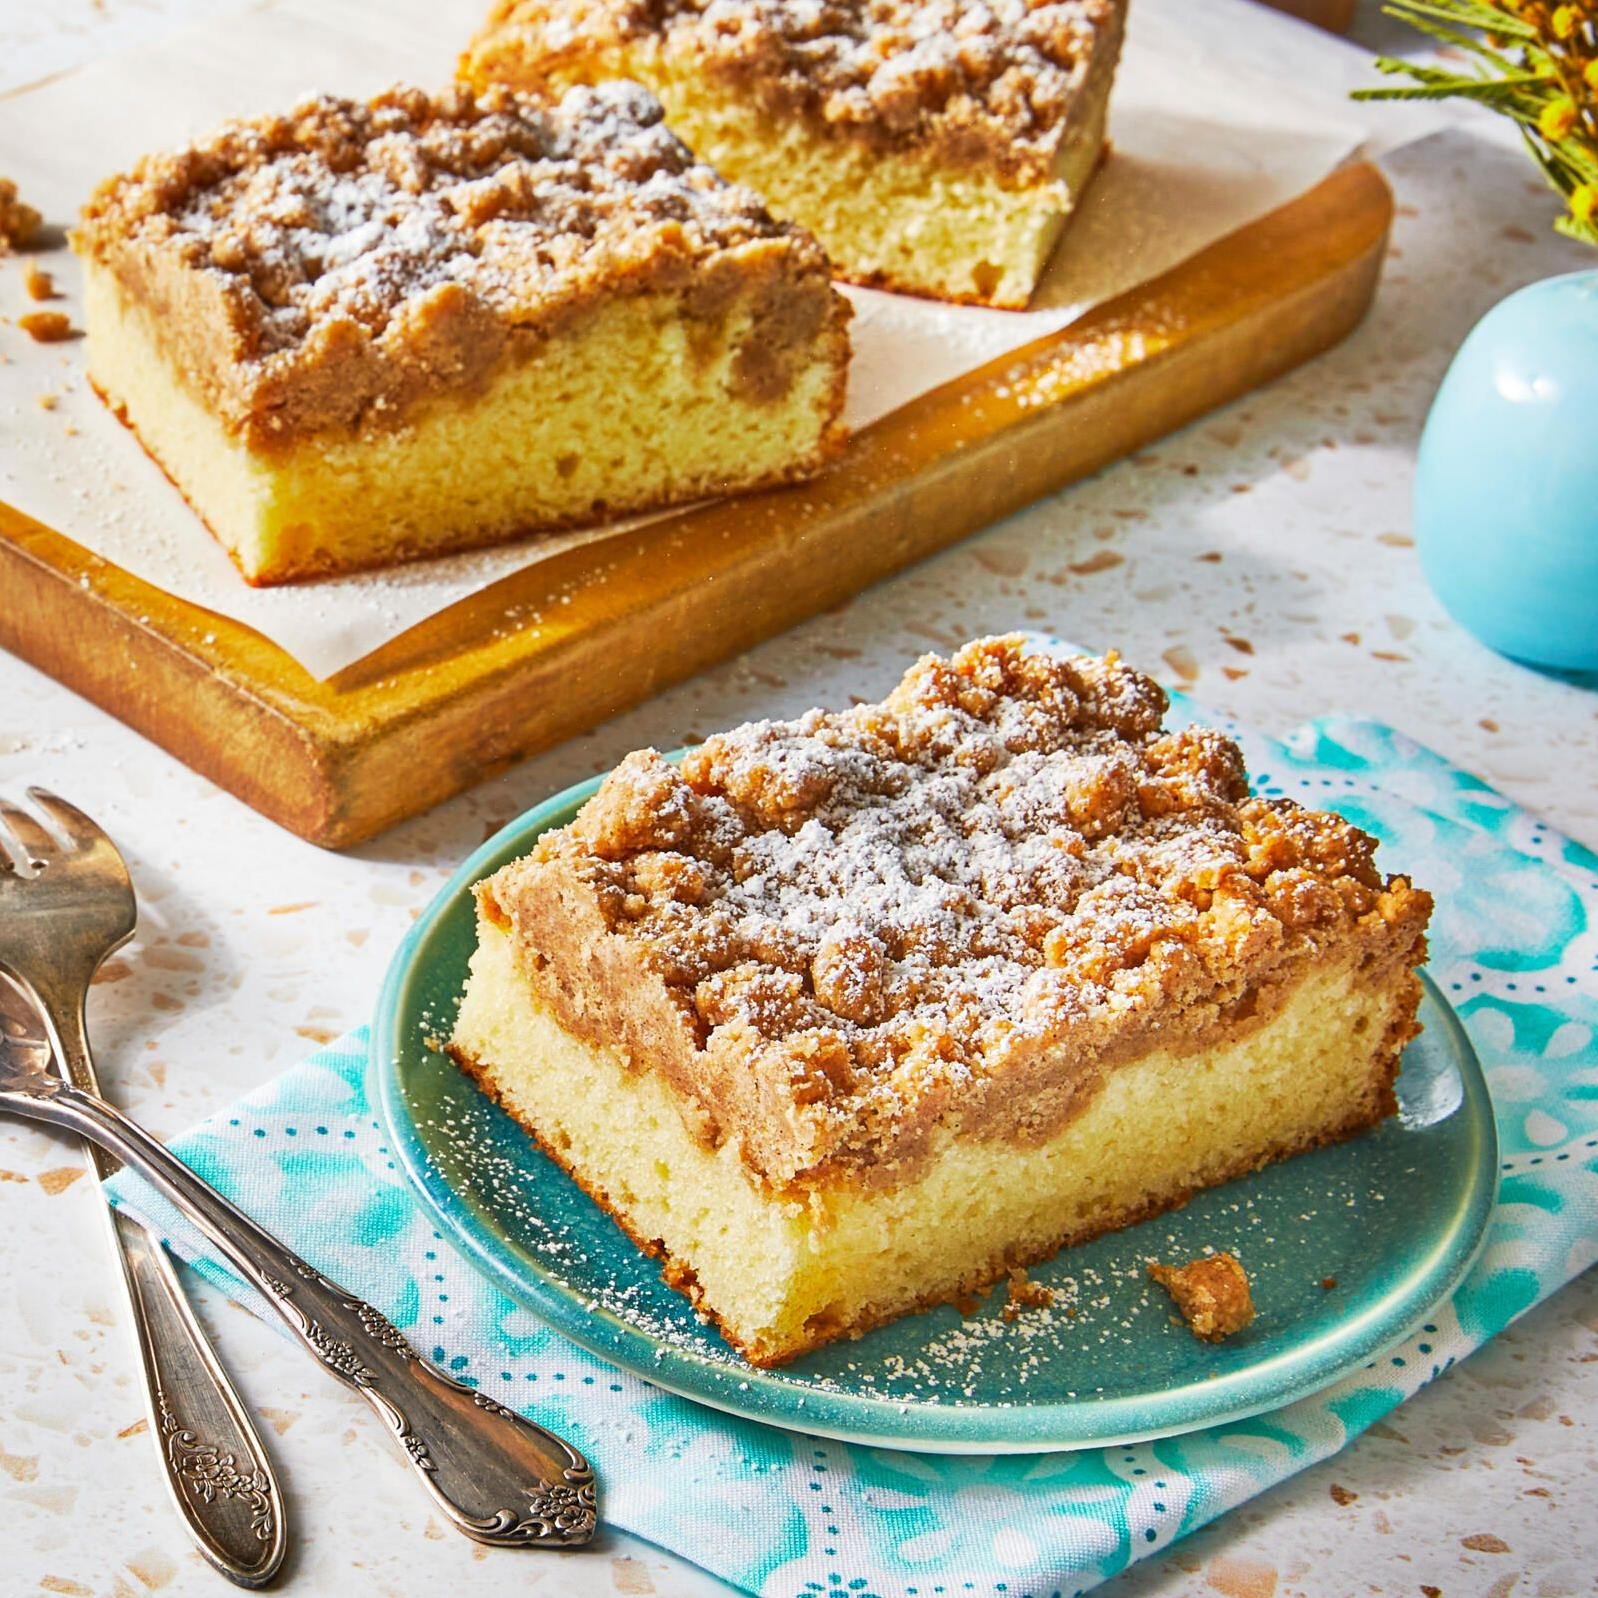  This crumbly and buttery topping will make your taste buds dance.